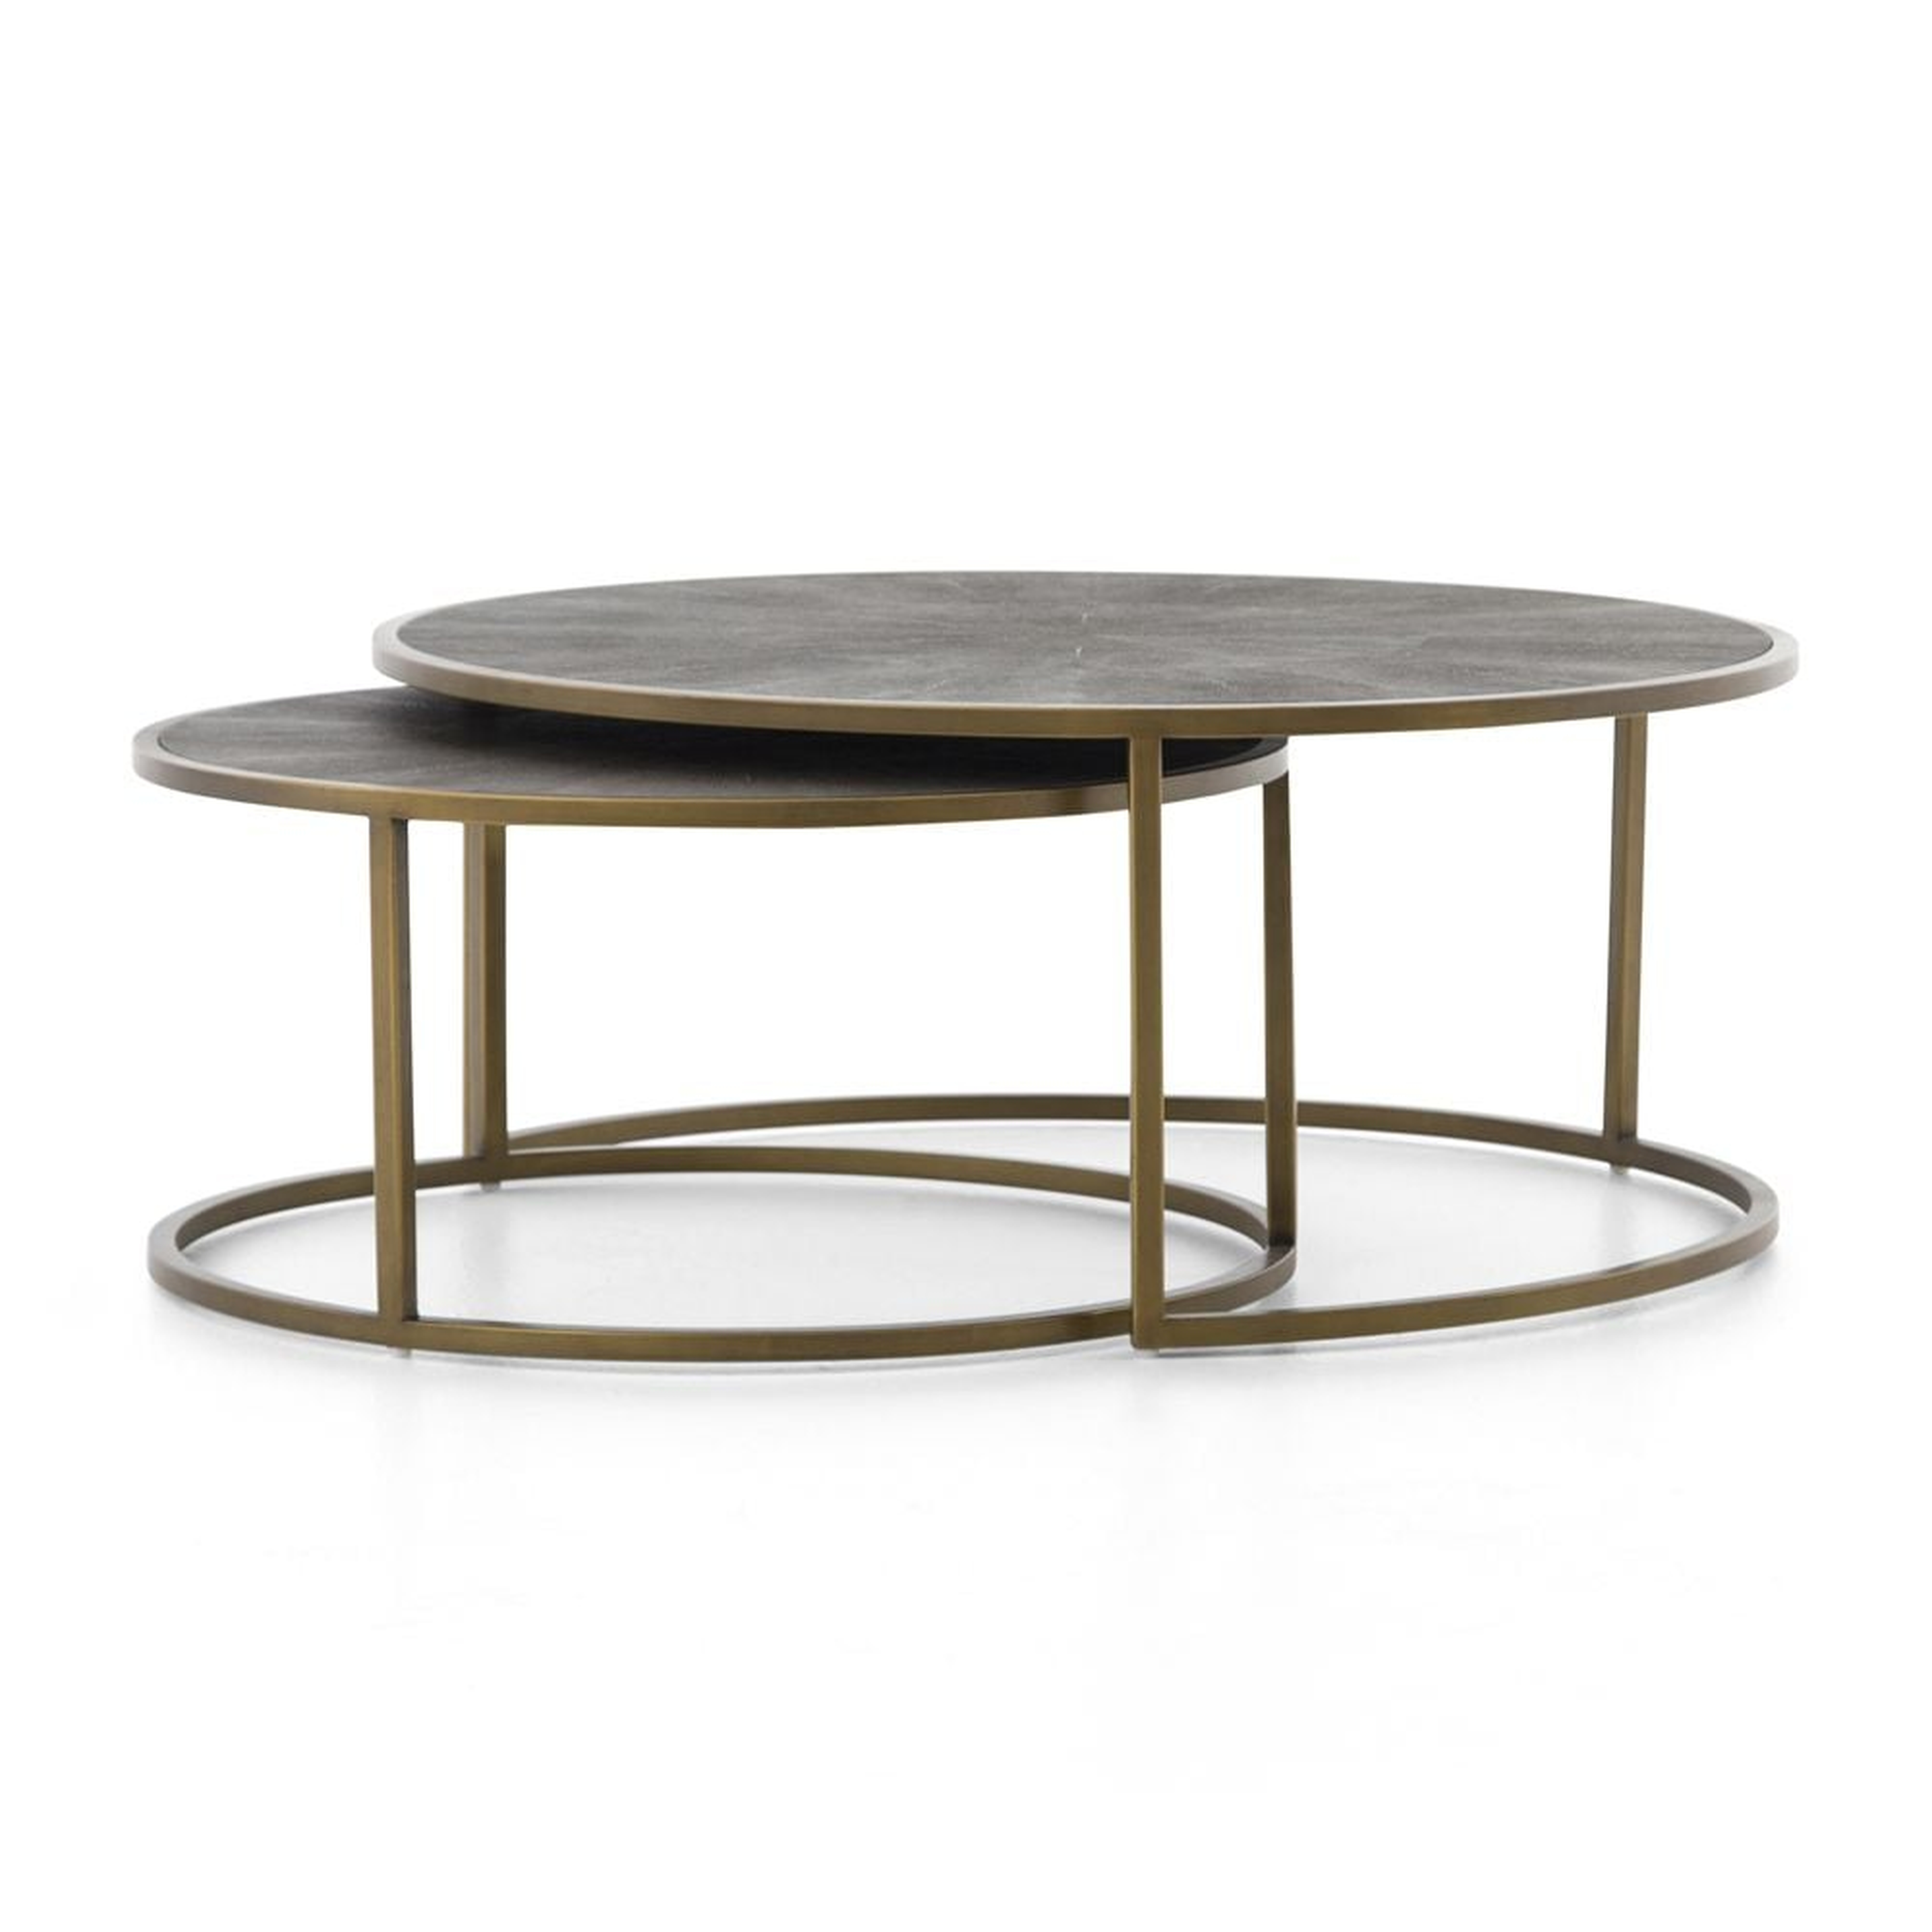 Keya Antique Brass Nesting Coffee Tables - Crate and Barrel